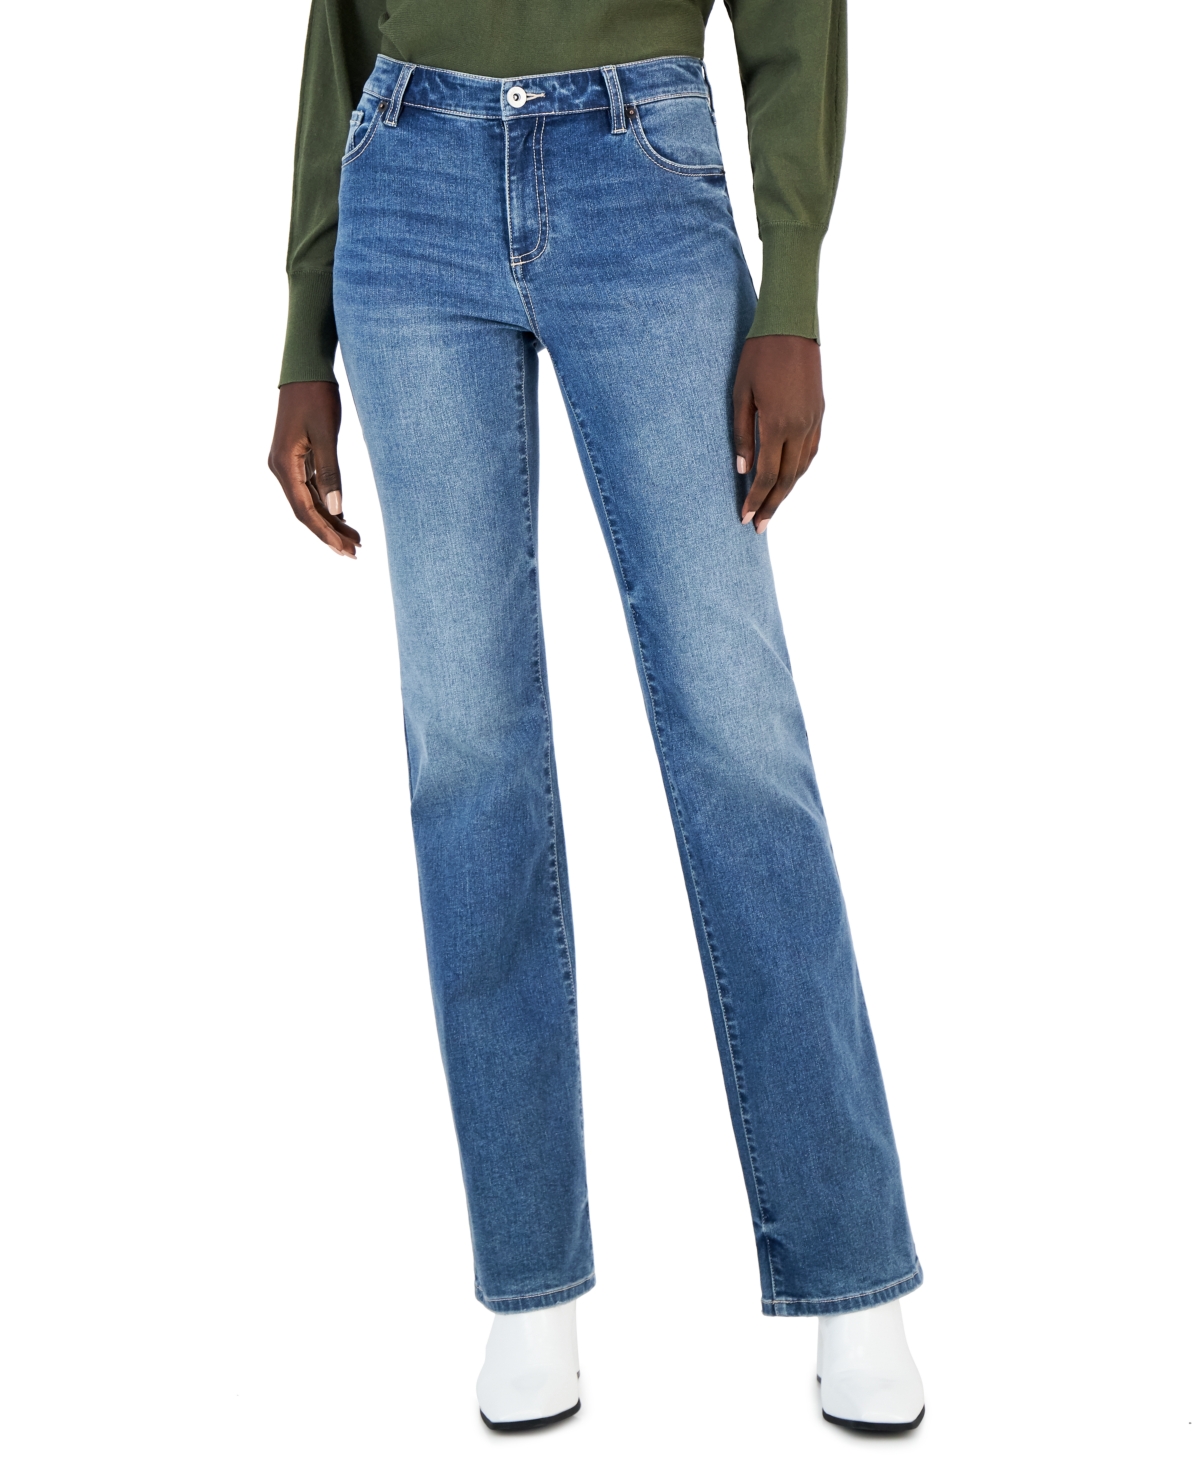  Inc International Concepts Women's Mid-Rise Bootcut Jeans, Created for Macy's